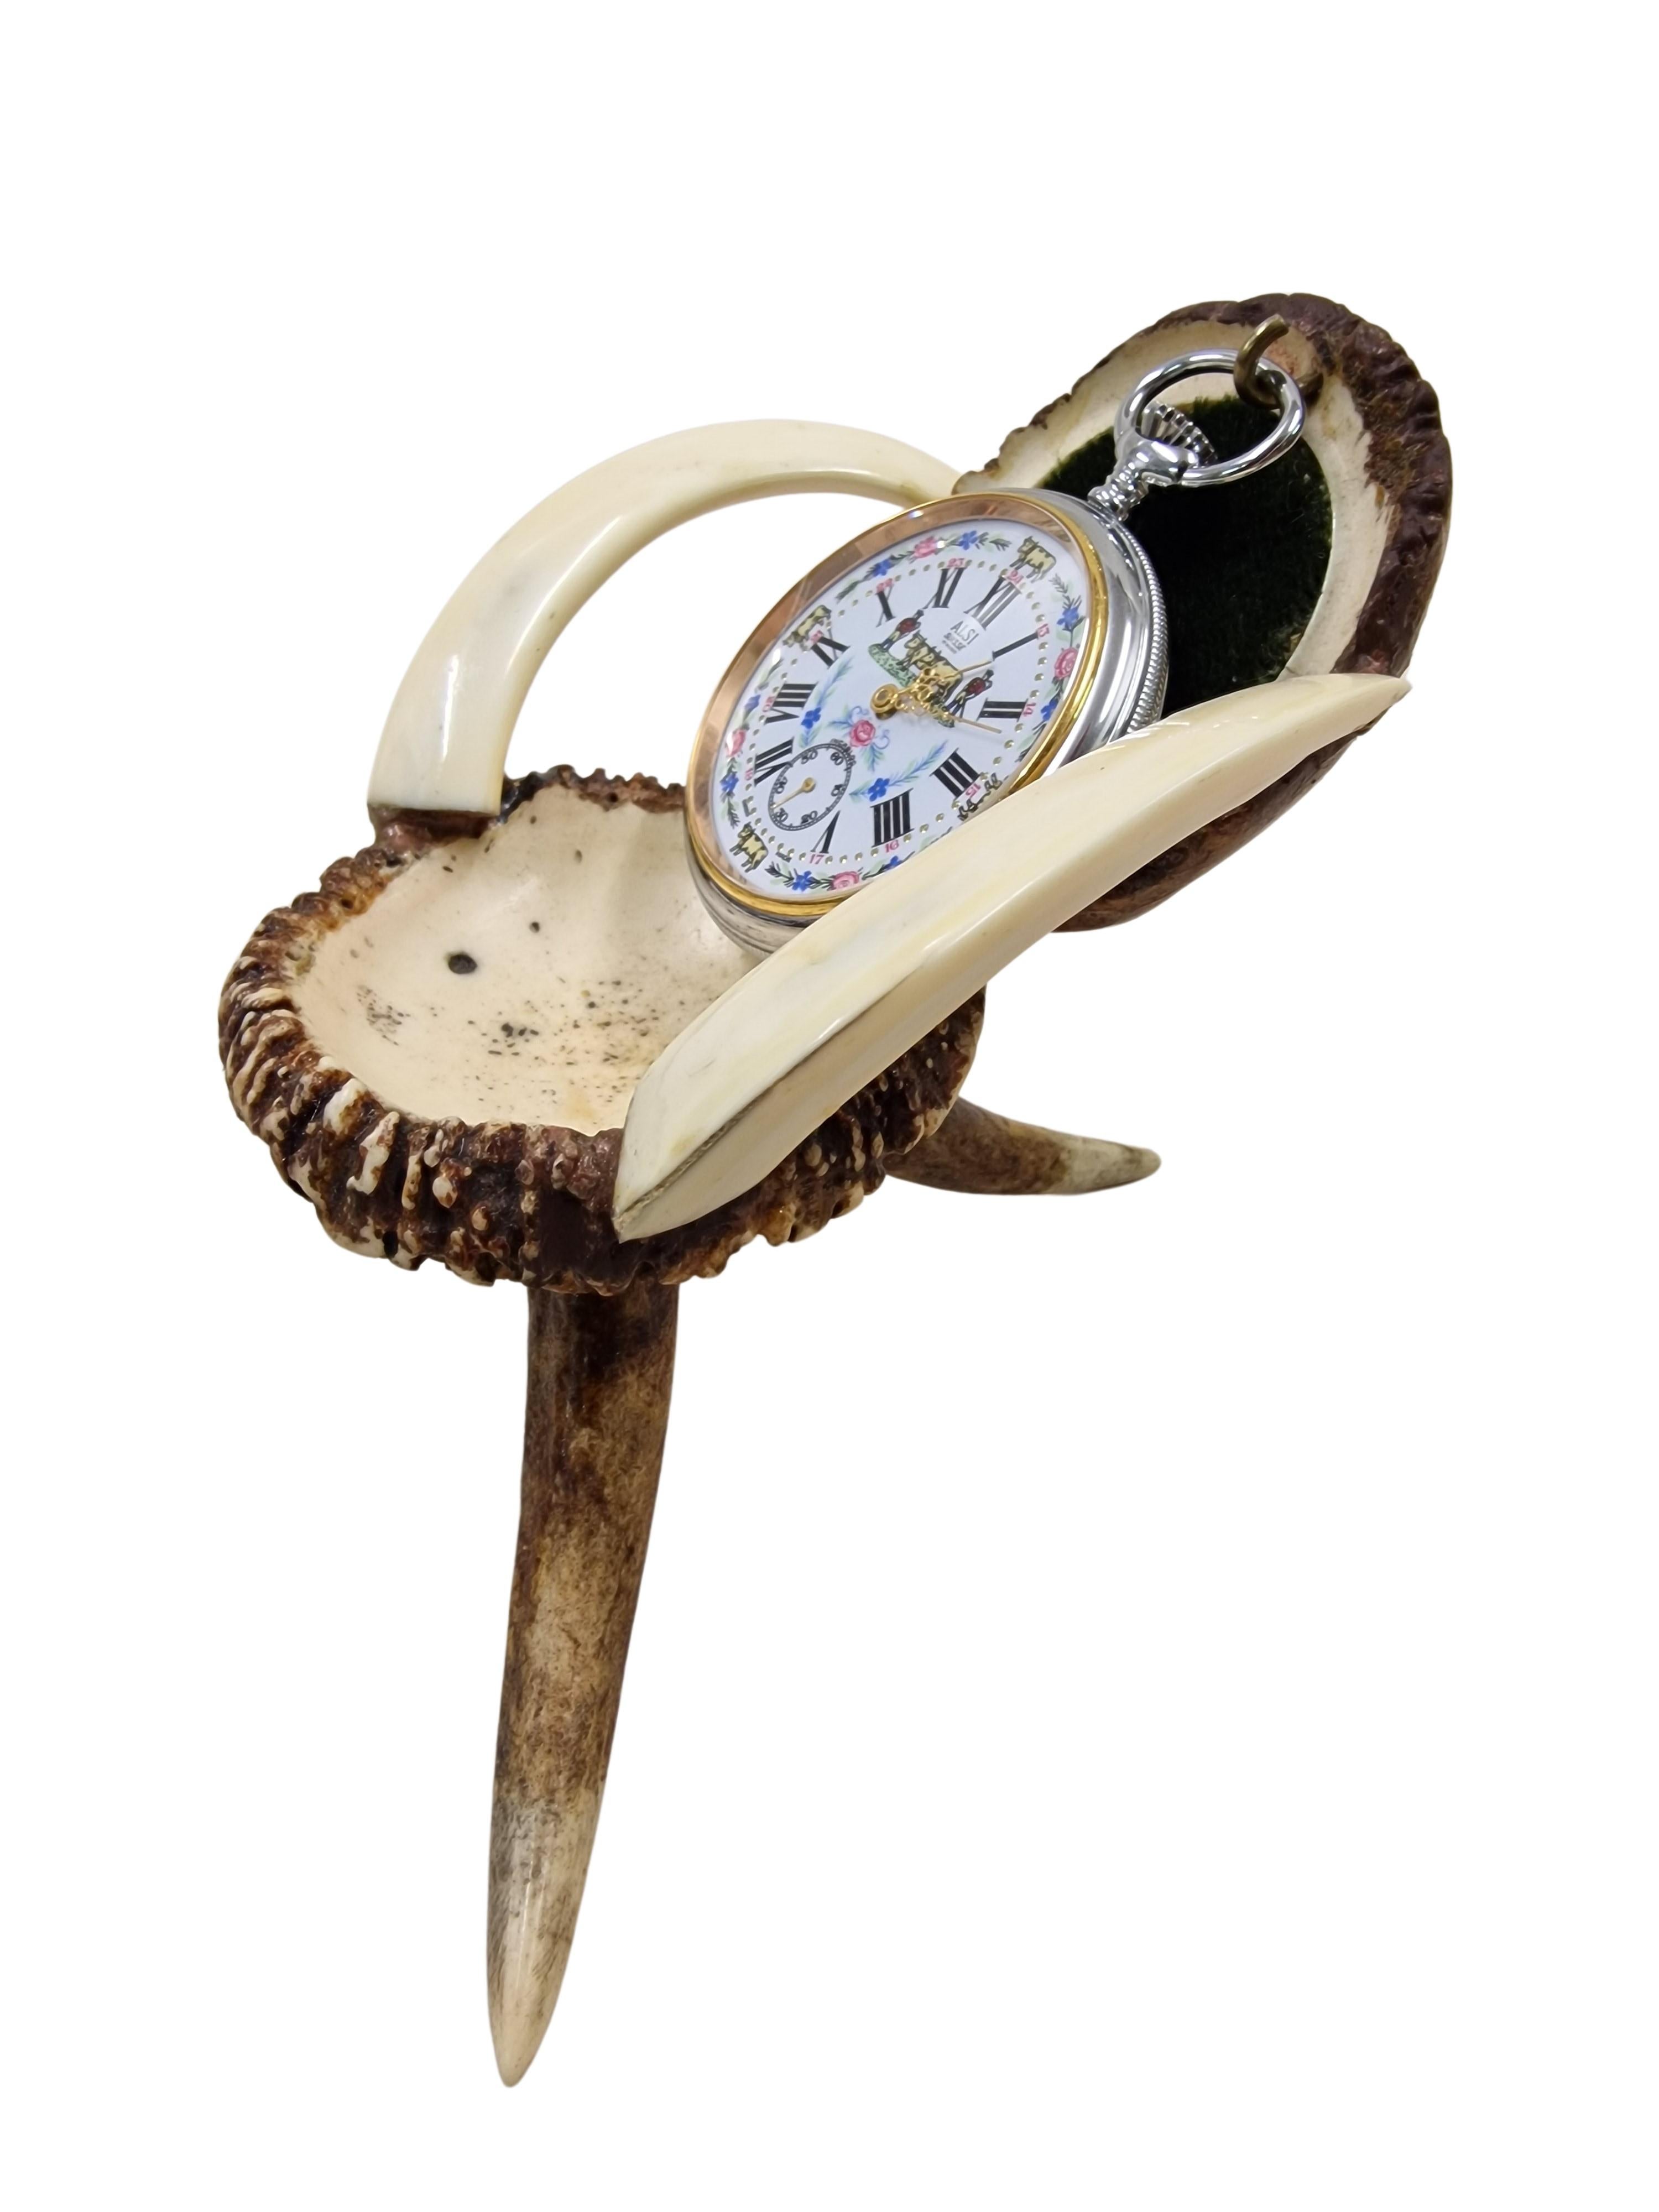 Rare pocket watch stand, miniature armchair, antler boar thooth, 1900, Tramp Art For Sale 2